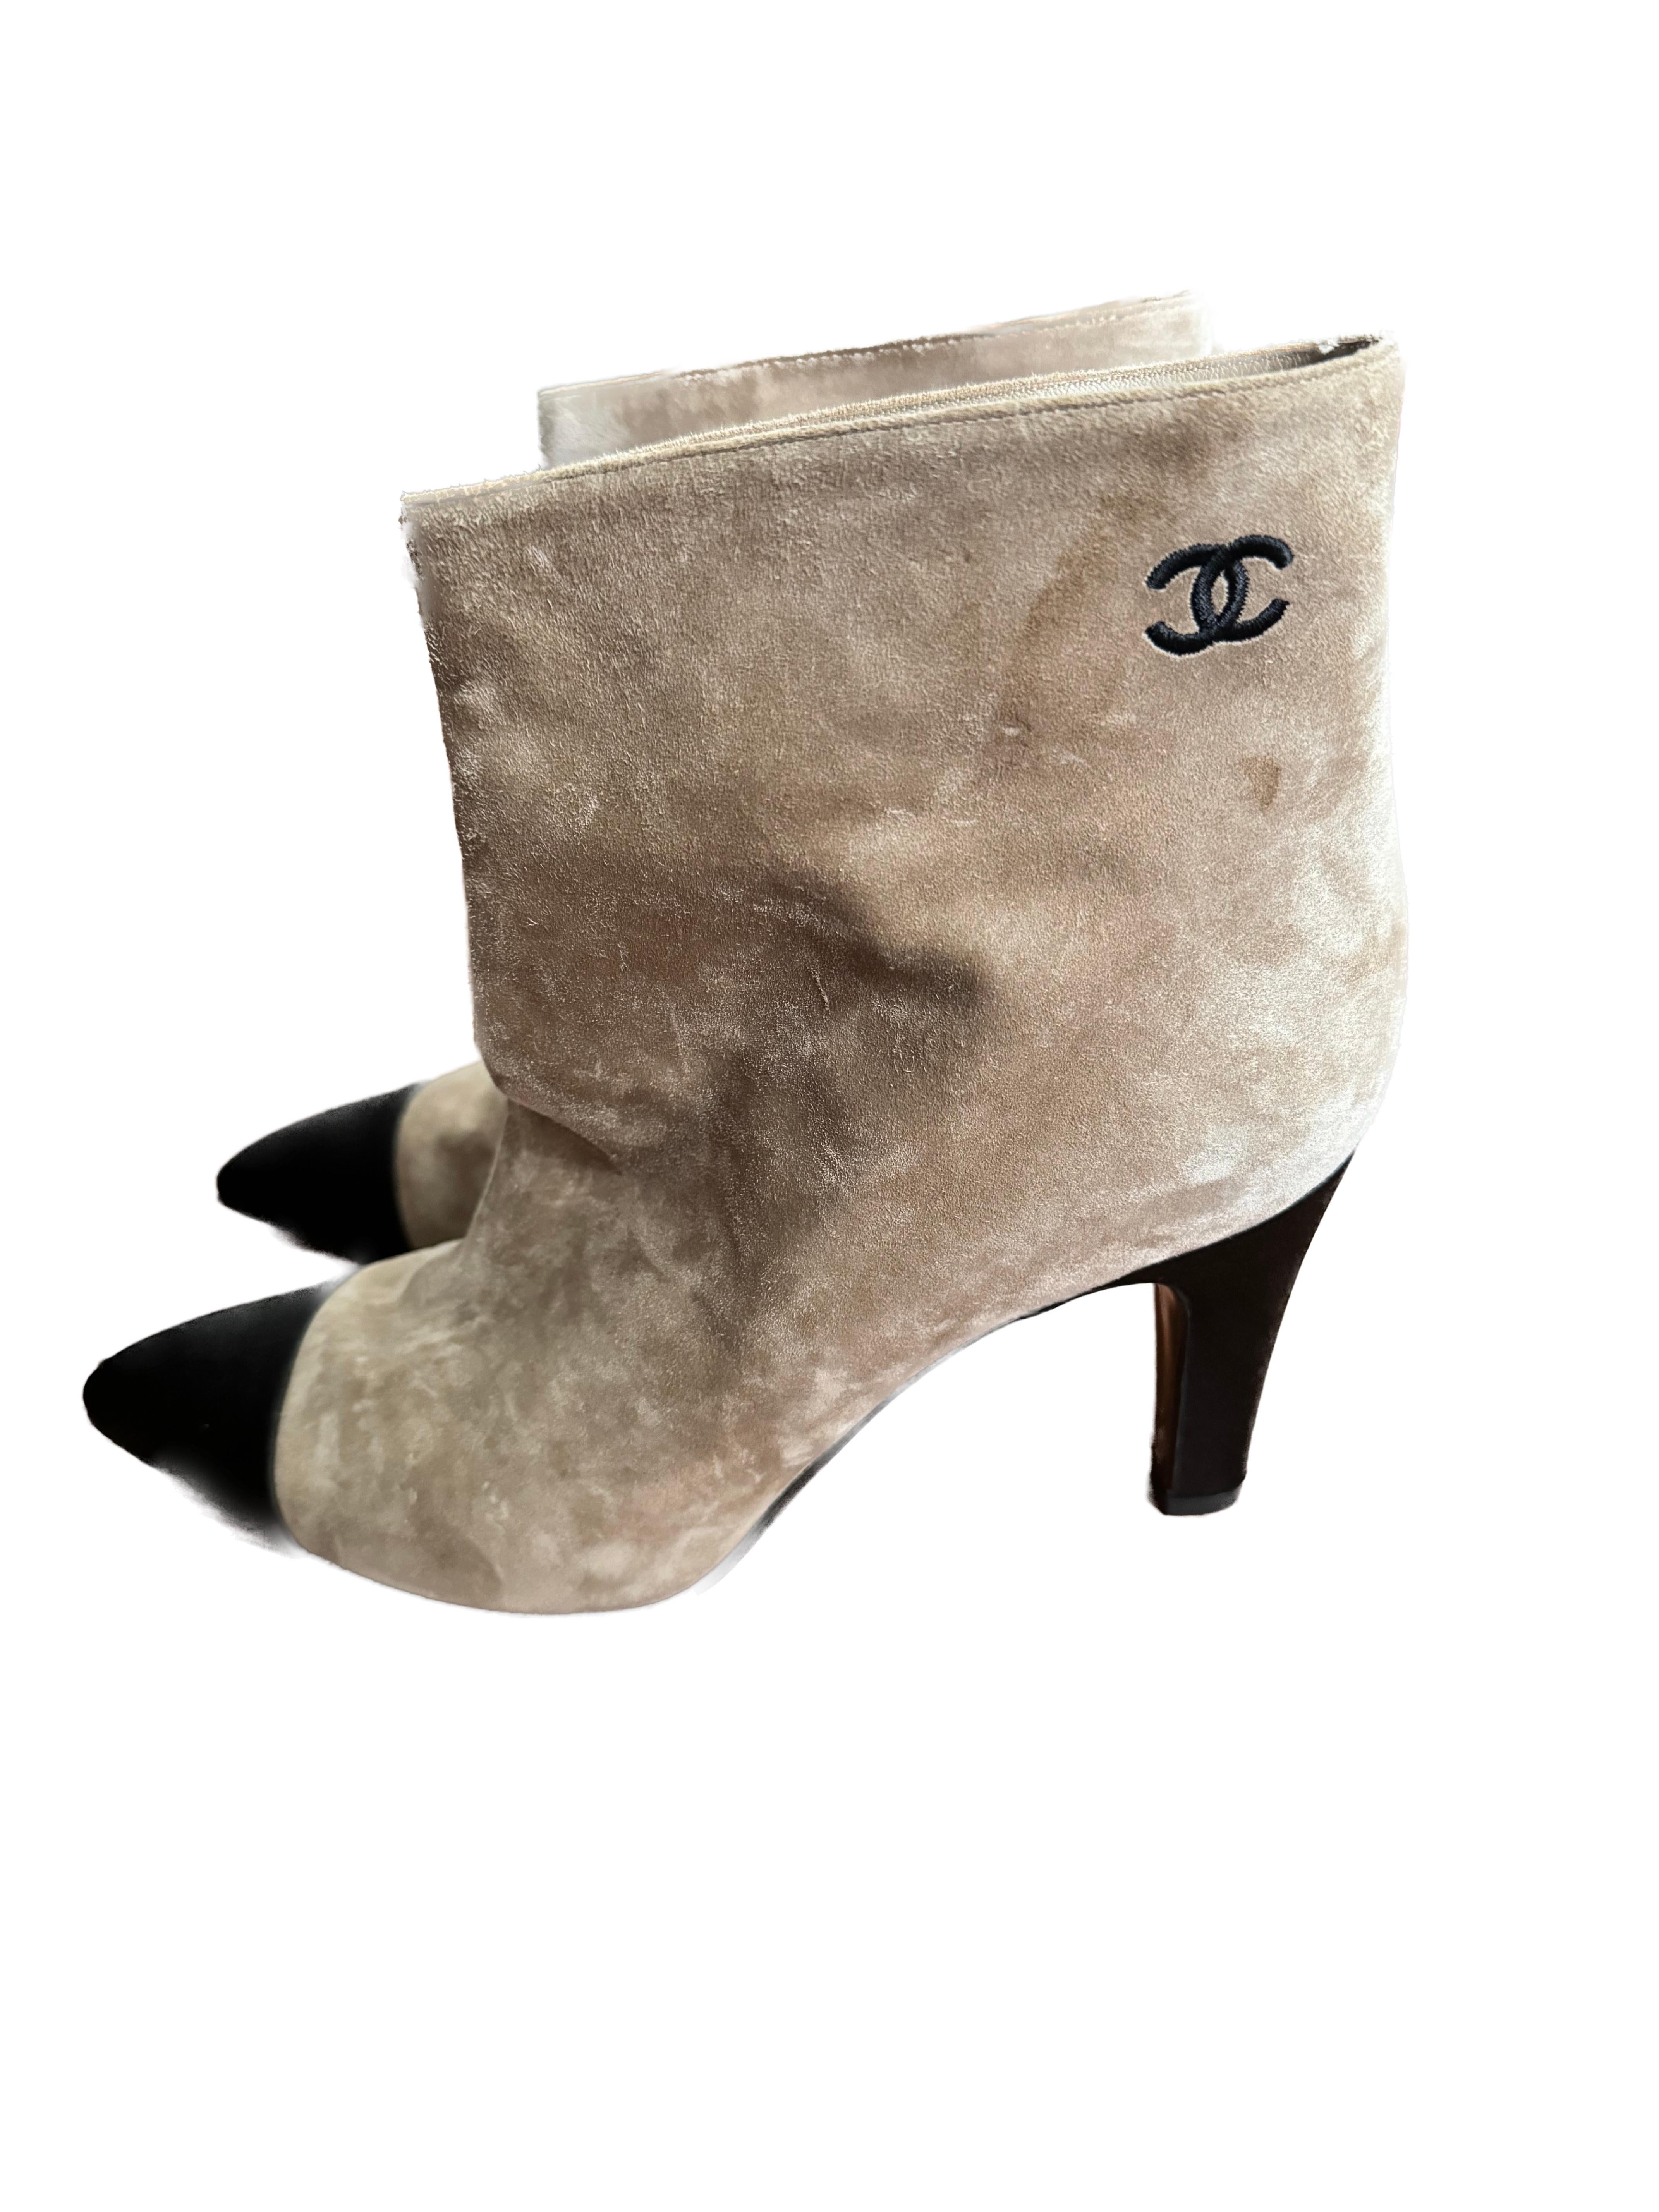 Chanel Sude Gabriela 2 tone Ankle Boots In Excellent Condition For Sale In Toronto, CA